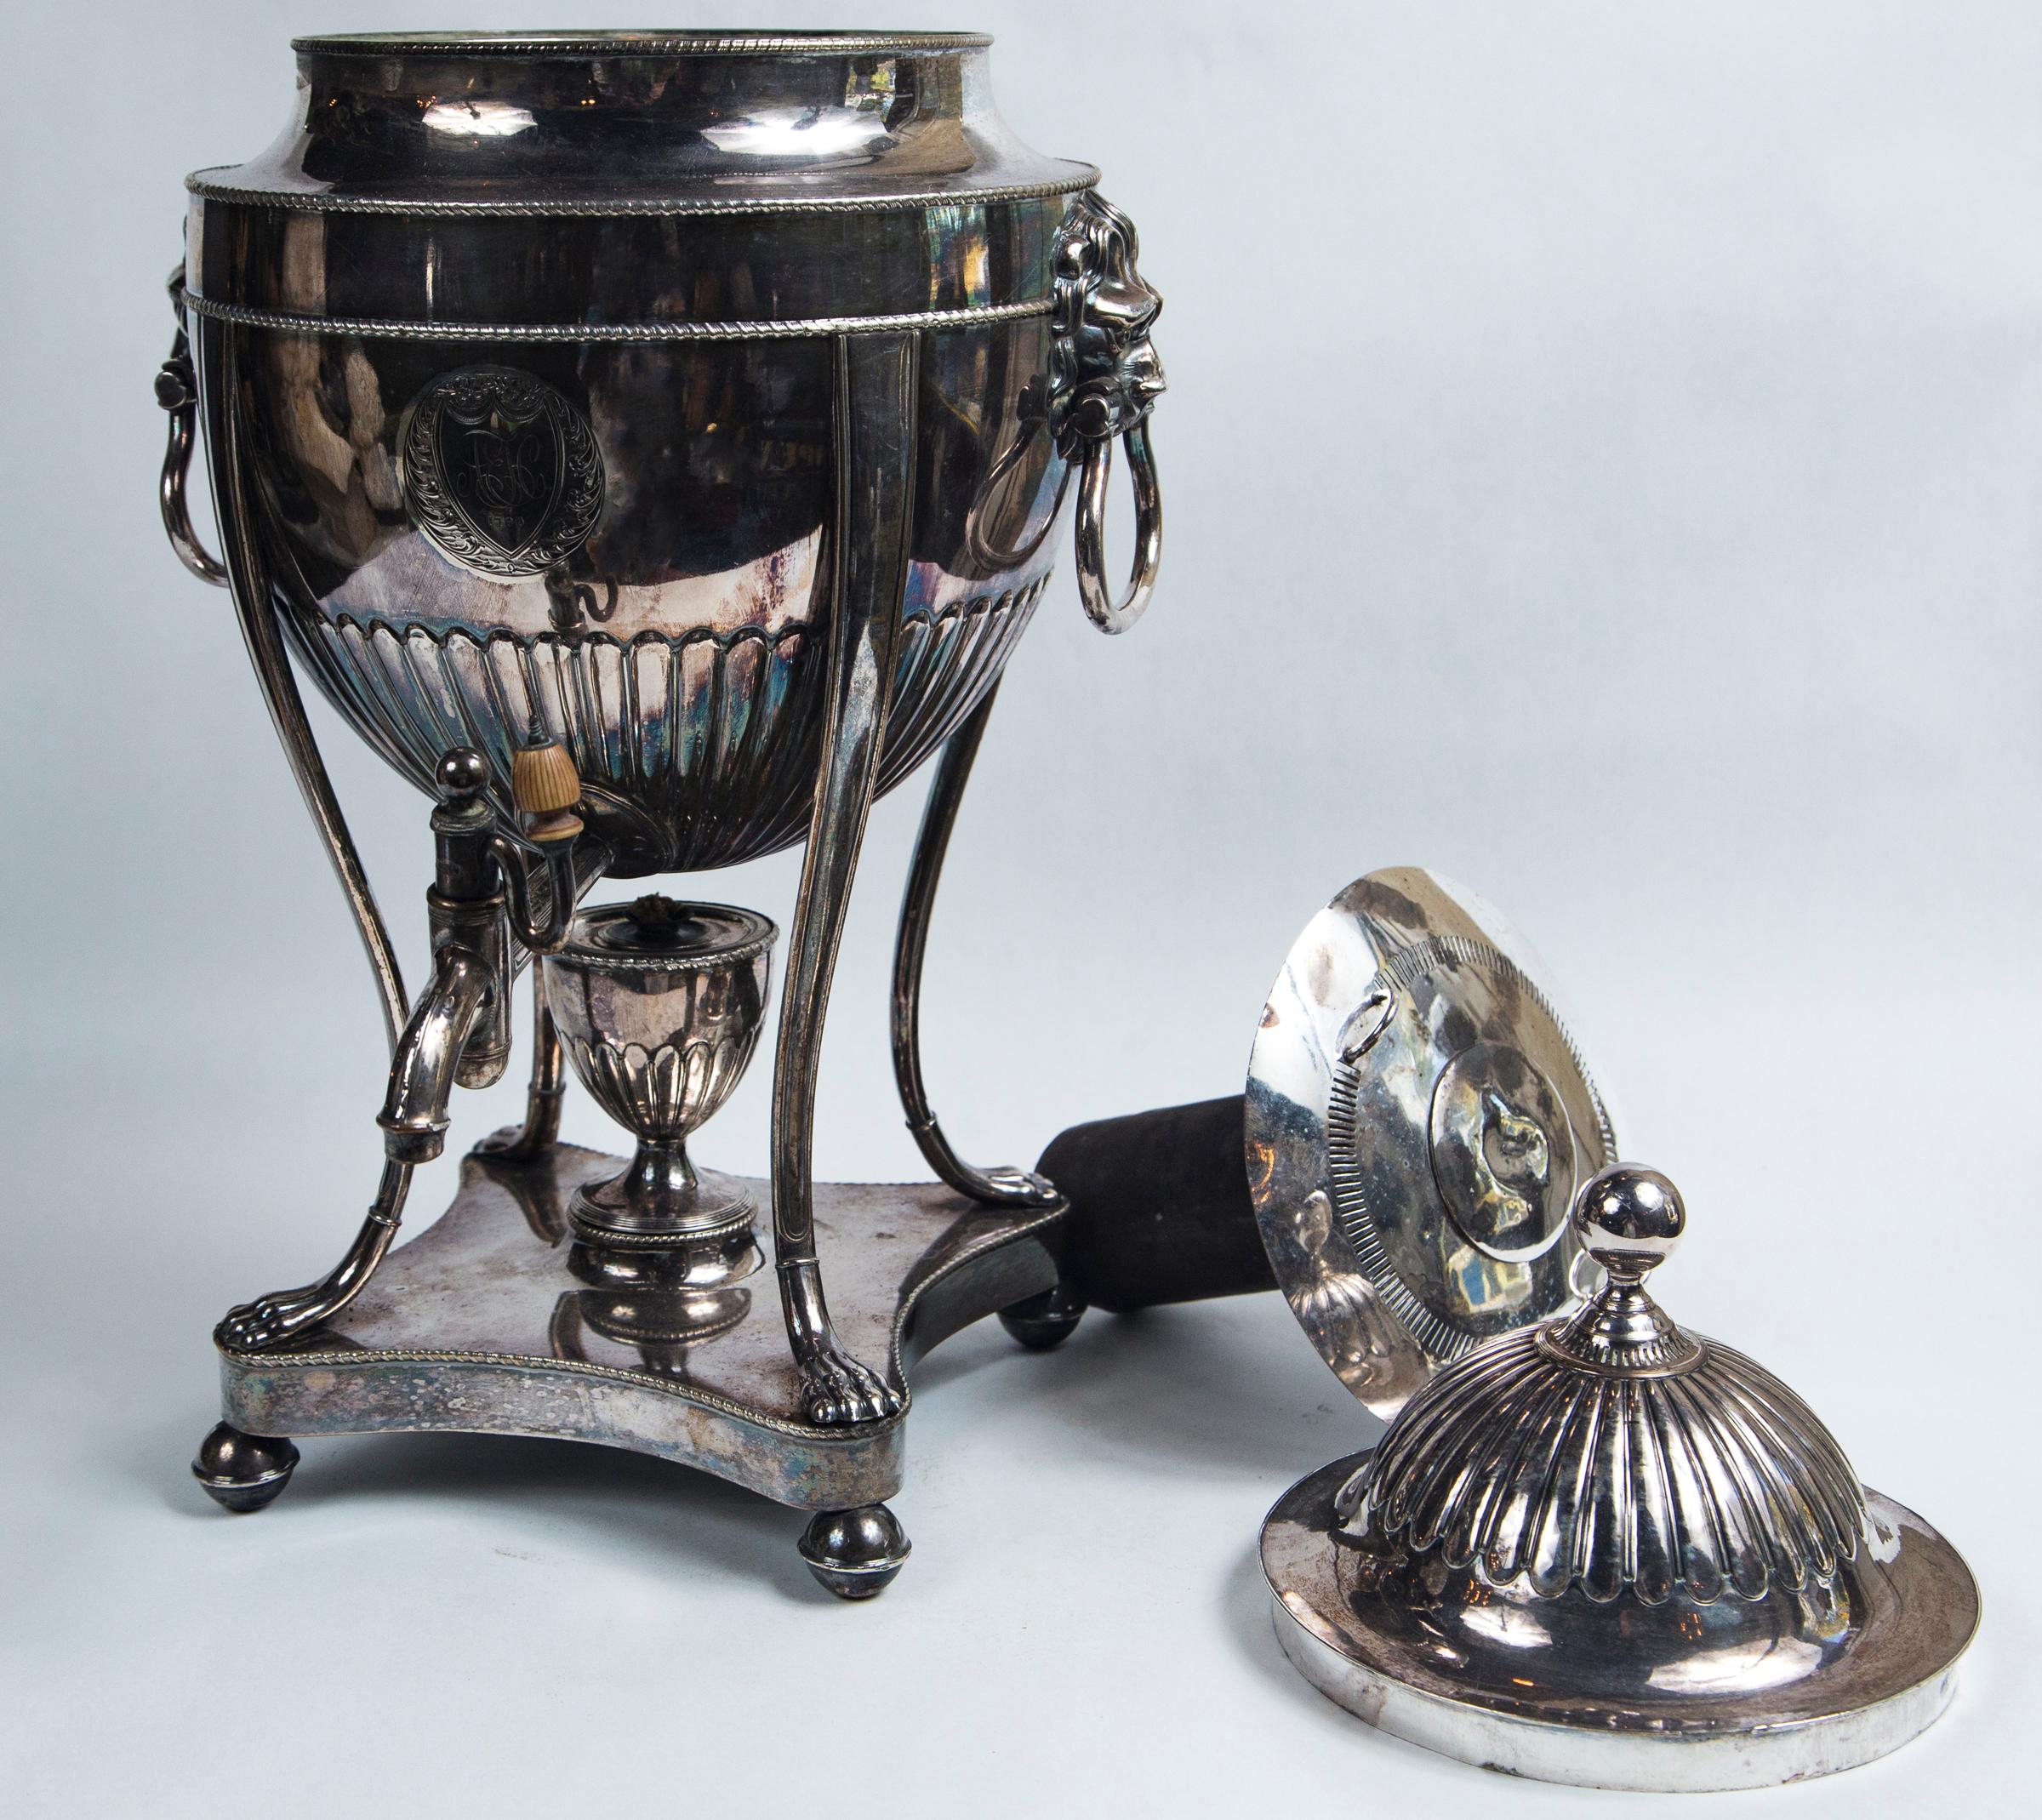 In classical George III form. Complete with burner and cylinder for hot coal or stones. Concave base on ball feet support the urn that has legs with paw feet. Lion mask ring handles. A shield shaped with monogram and date of 1790 within a circle.
  